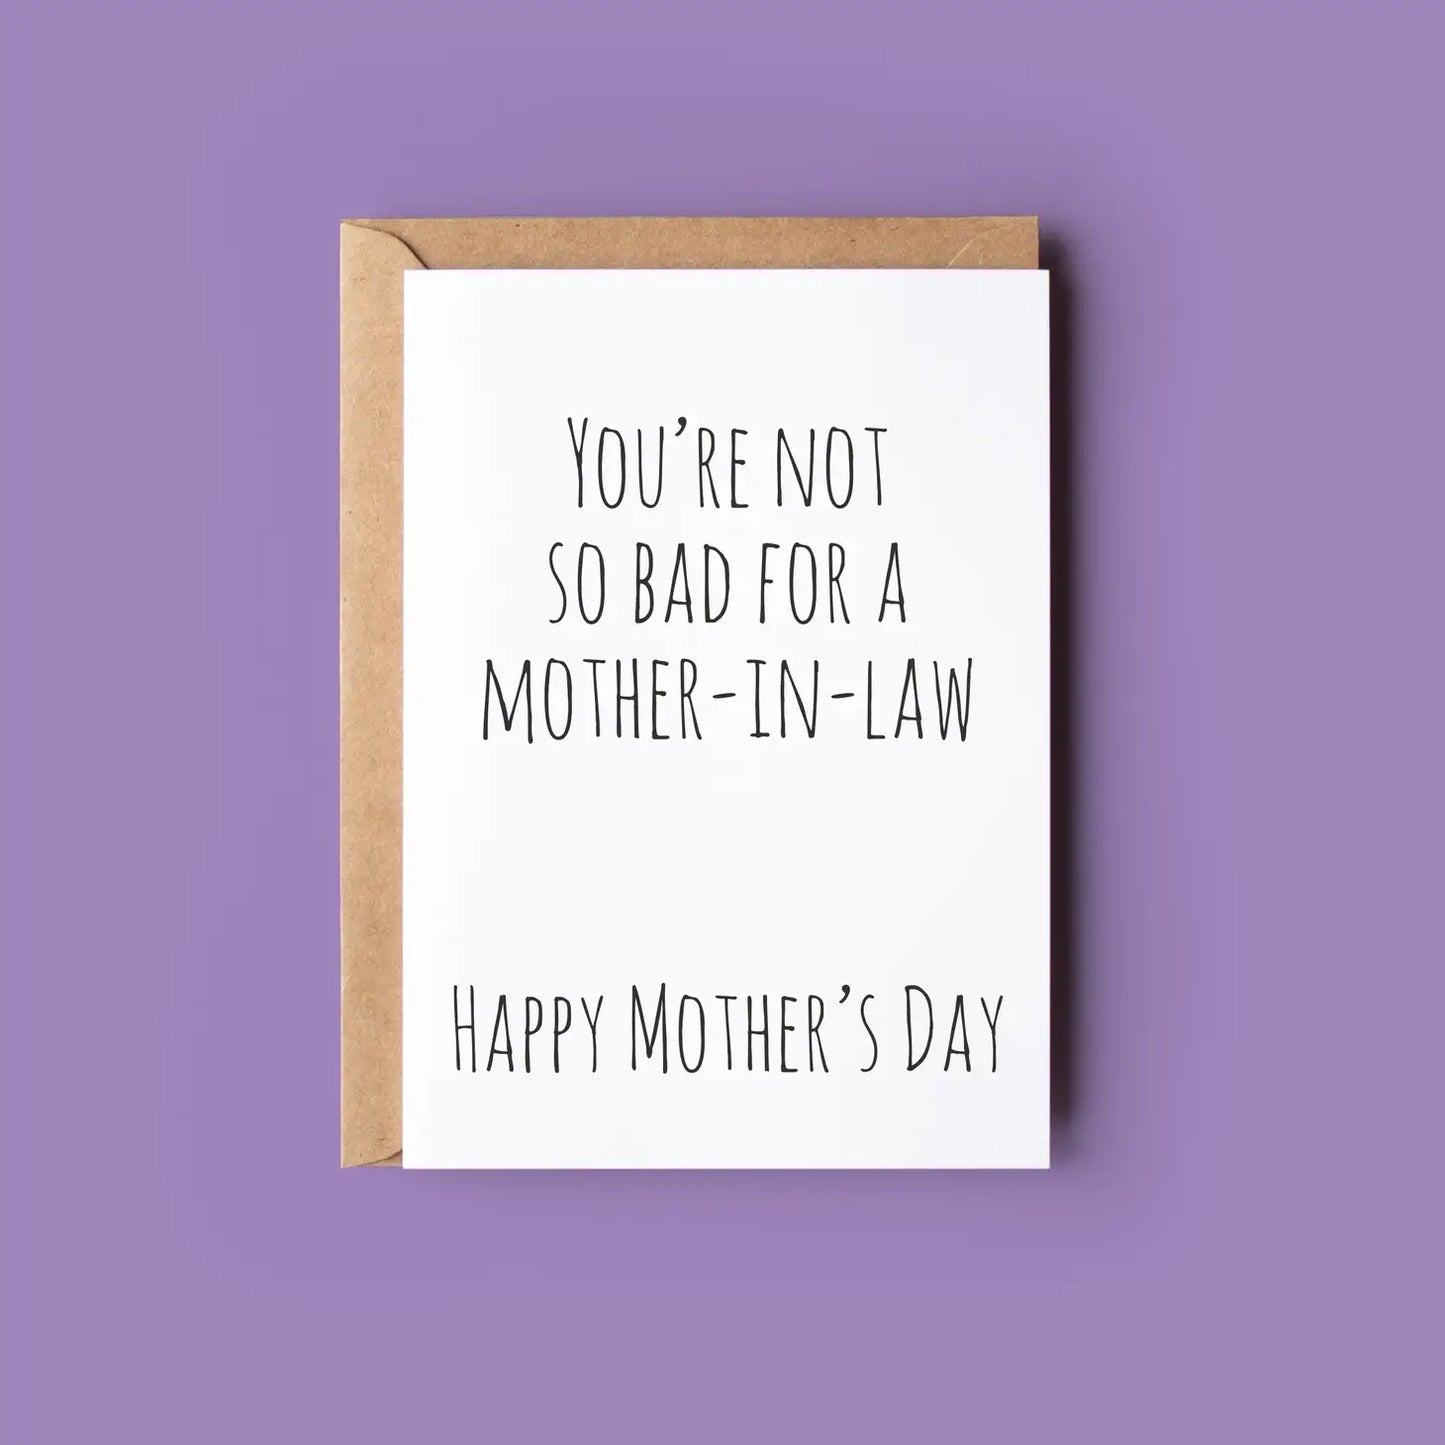 Not So Bad For a Mother-in-Law  - Greeting Cards Made in Ireland